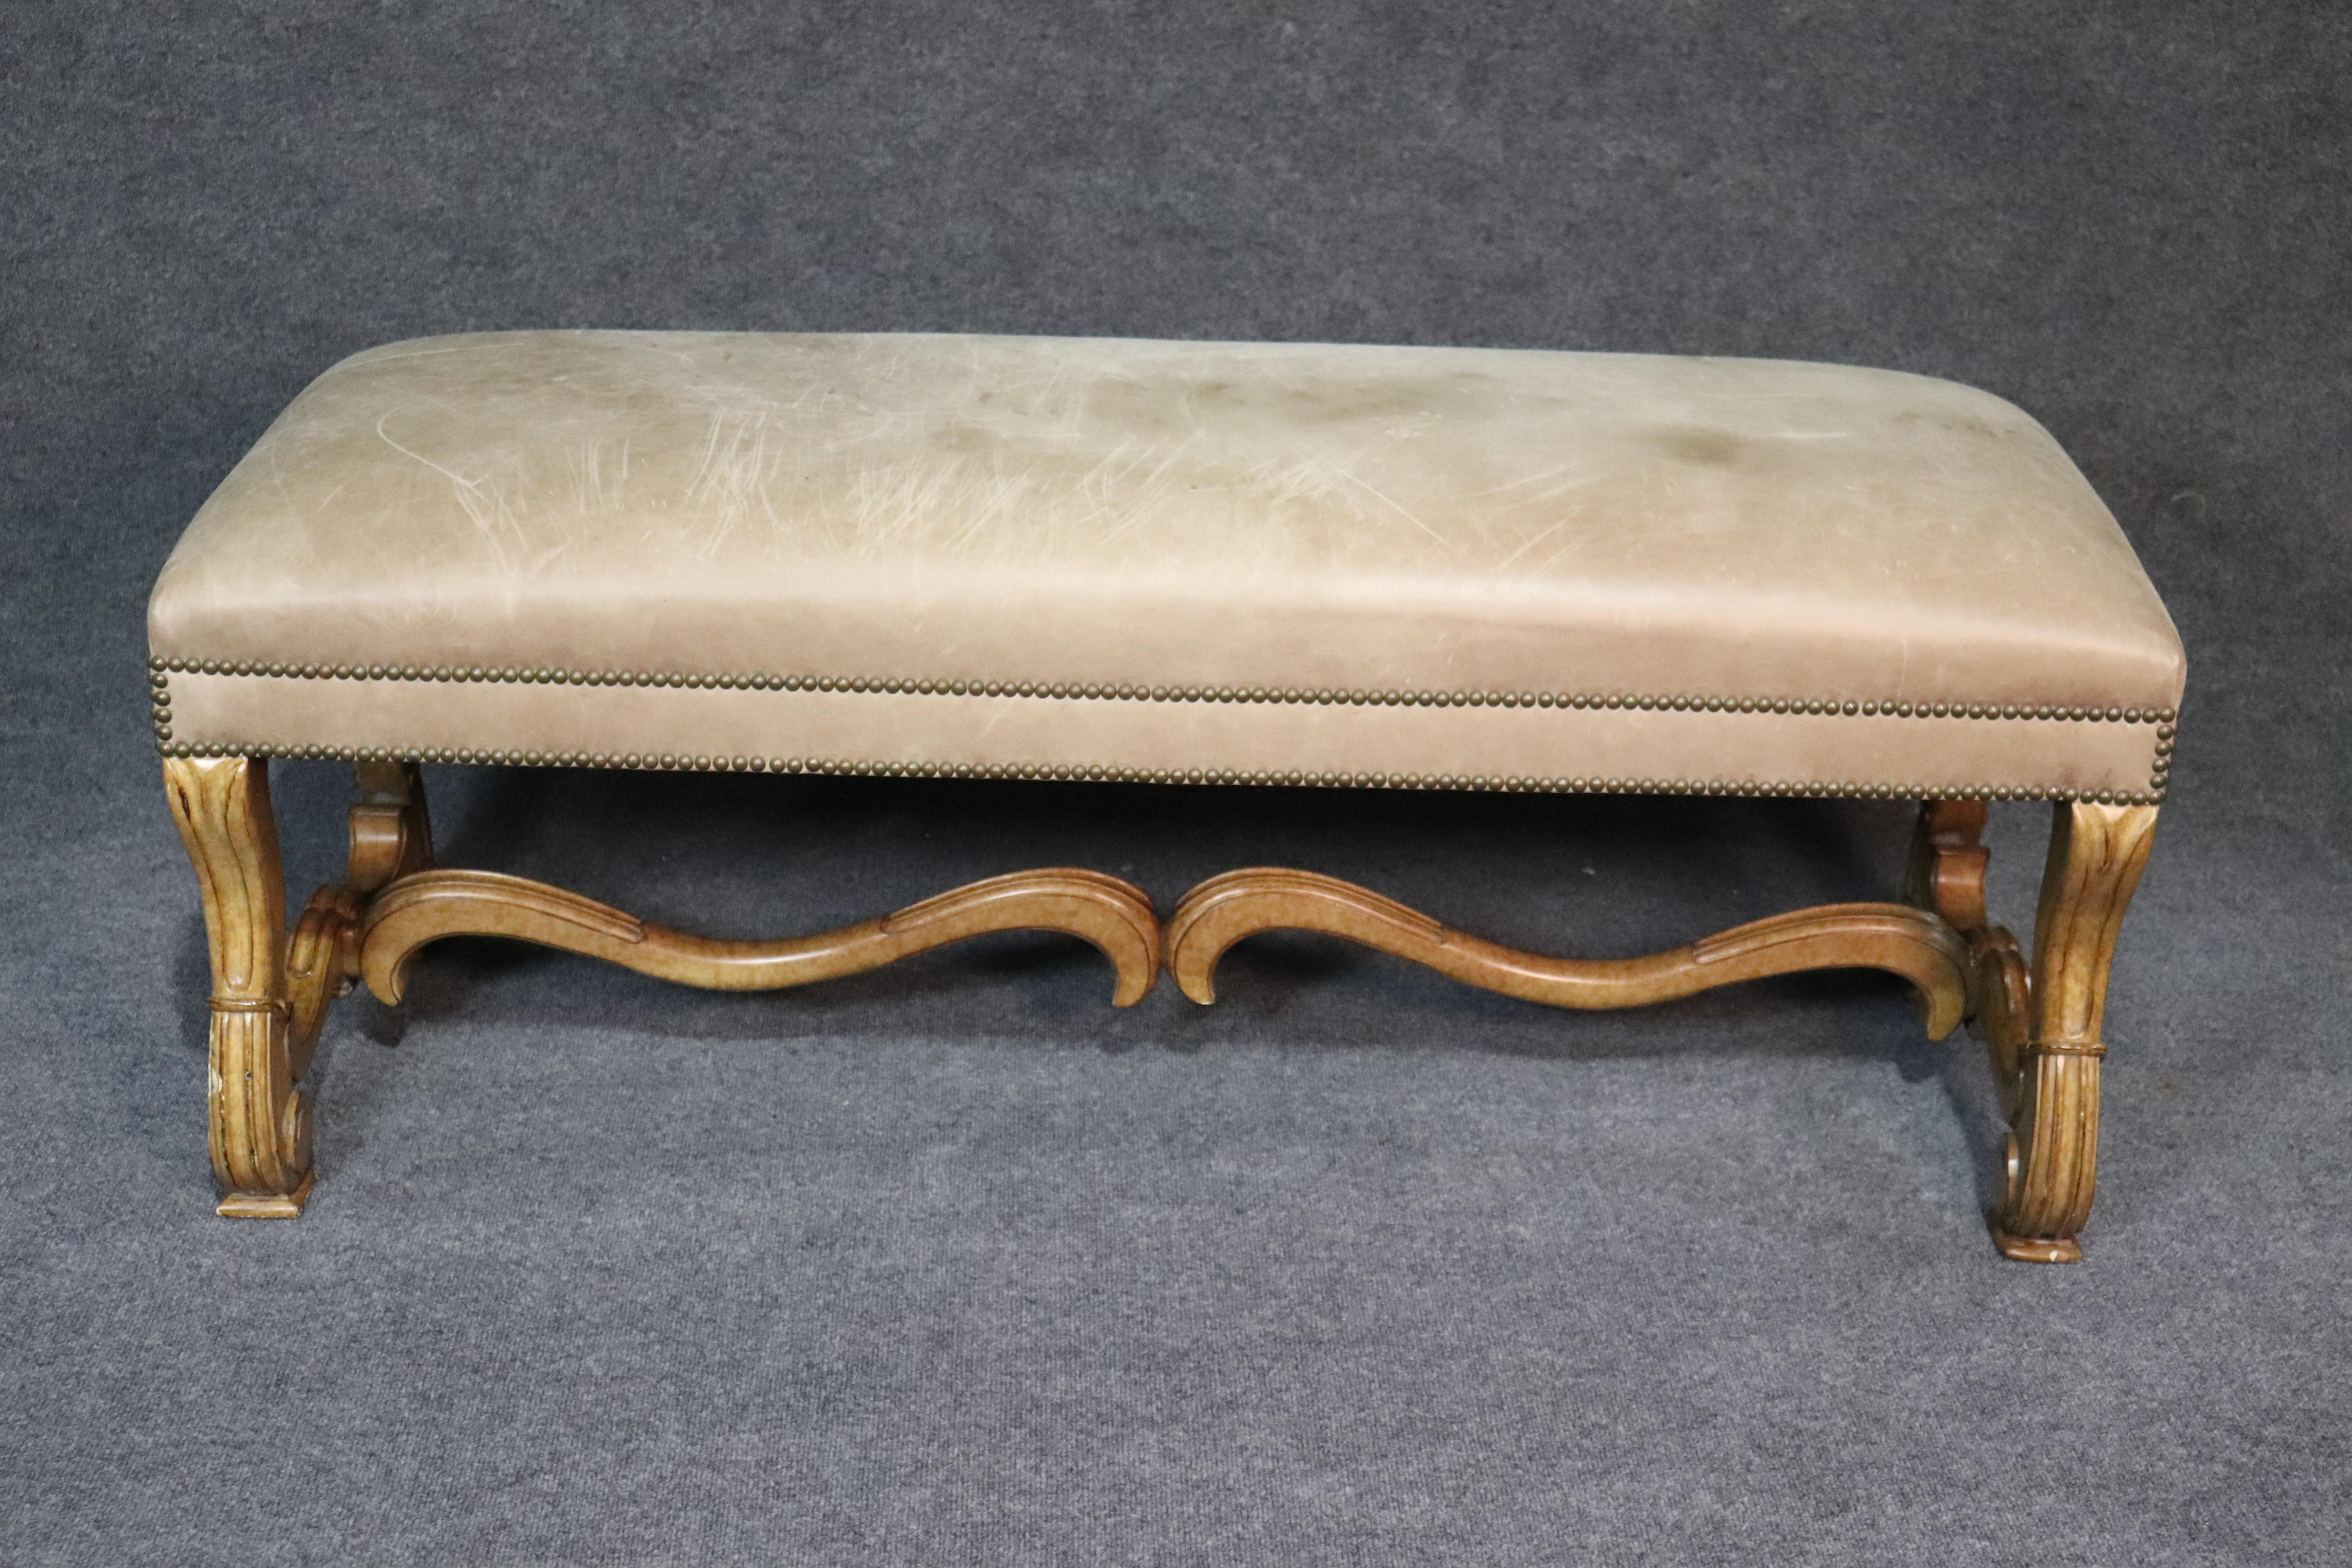 This is a stunning French style bench made in North Carolina. The bench has a rustic lacquer finish and a gorgeous time-worn aged leather surface with brass nail-head trim for a rustic and yet tailored appearance. The bench can be used at the foot